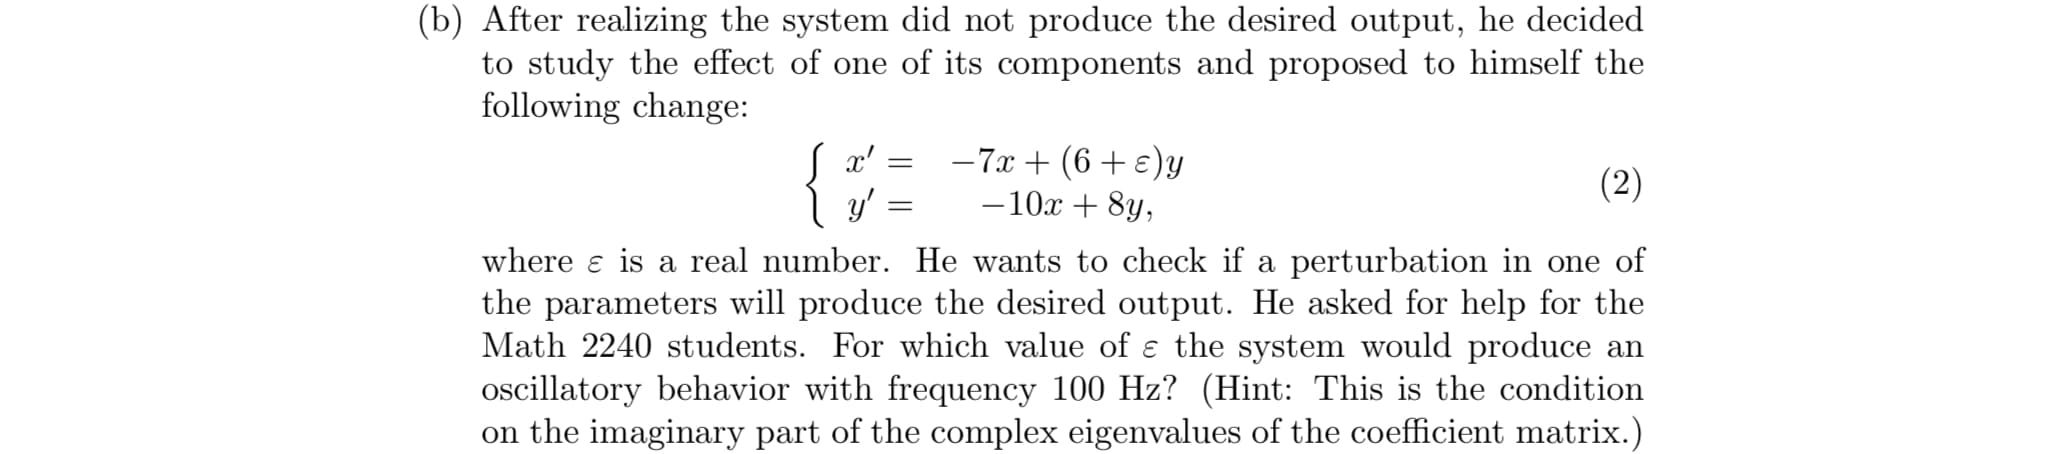 (b) After realizing the system did not produce the desired output, he decided
f its components and proposed to himselfthe
to study the effect of one o
following change
10x +8y
where ε is a real number. He wants to check if a perturbation in one of
the parameters will produce the desired output. He asked for help for the
Math 2240 students. For which value of ε the system would produce an
oscillatory behavior with frequency 100 Hz? (Hint: This is the condition
on the imaginary part of the complex eigenvalues of the coefficient matrix.)
